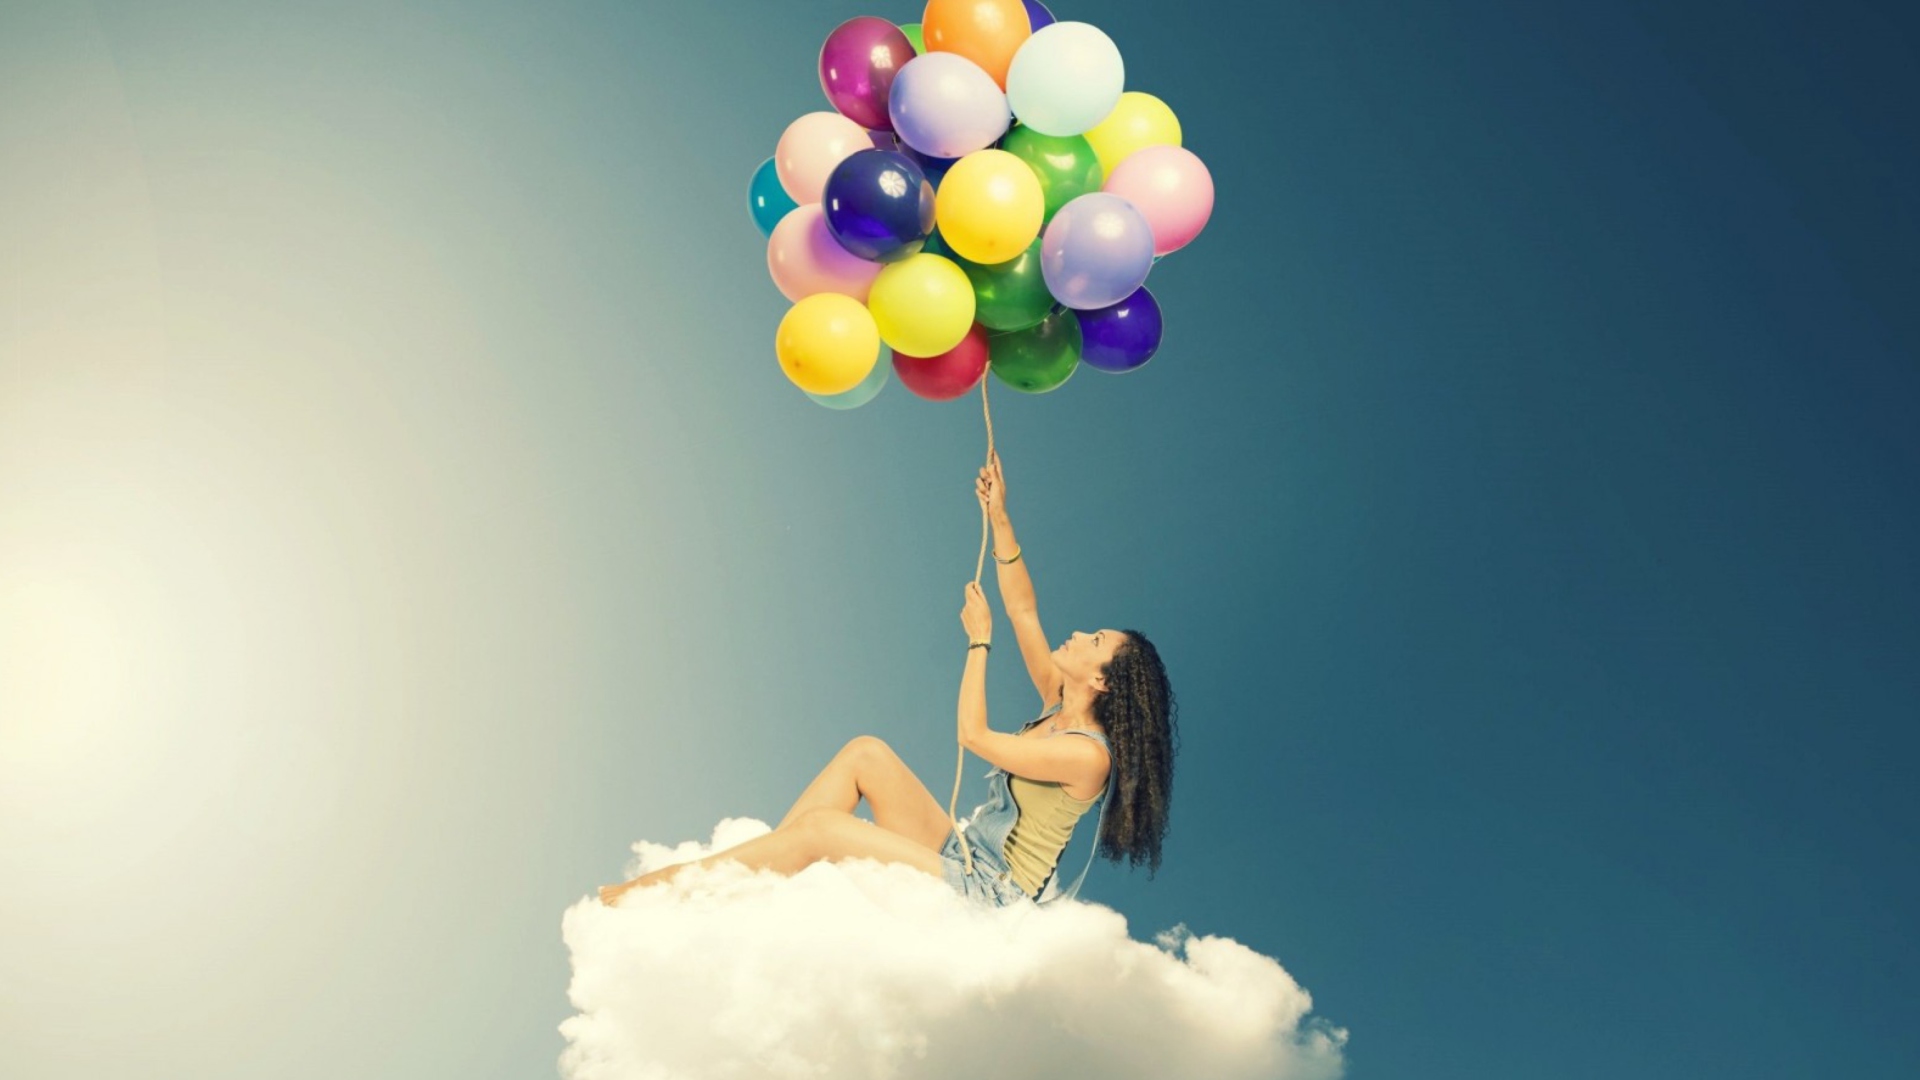 Flyin High On Cloud With Balloons wallpaper 1920x1080